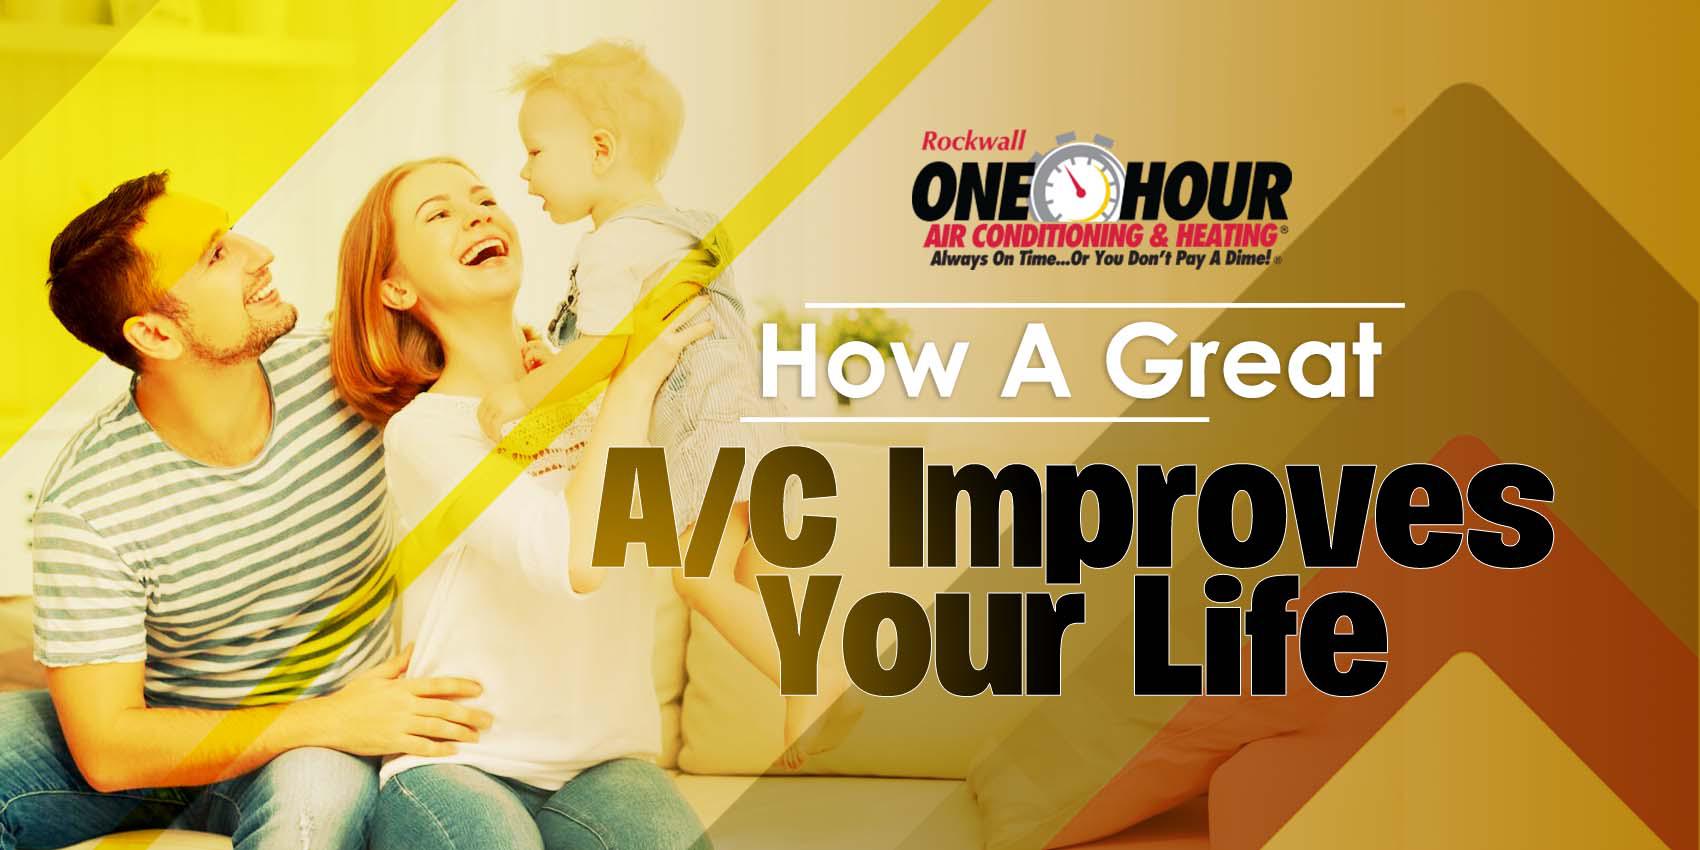 How a Great A/C Improves Your Life